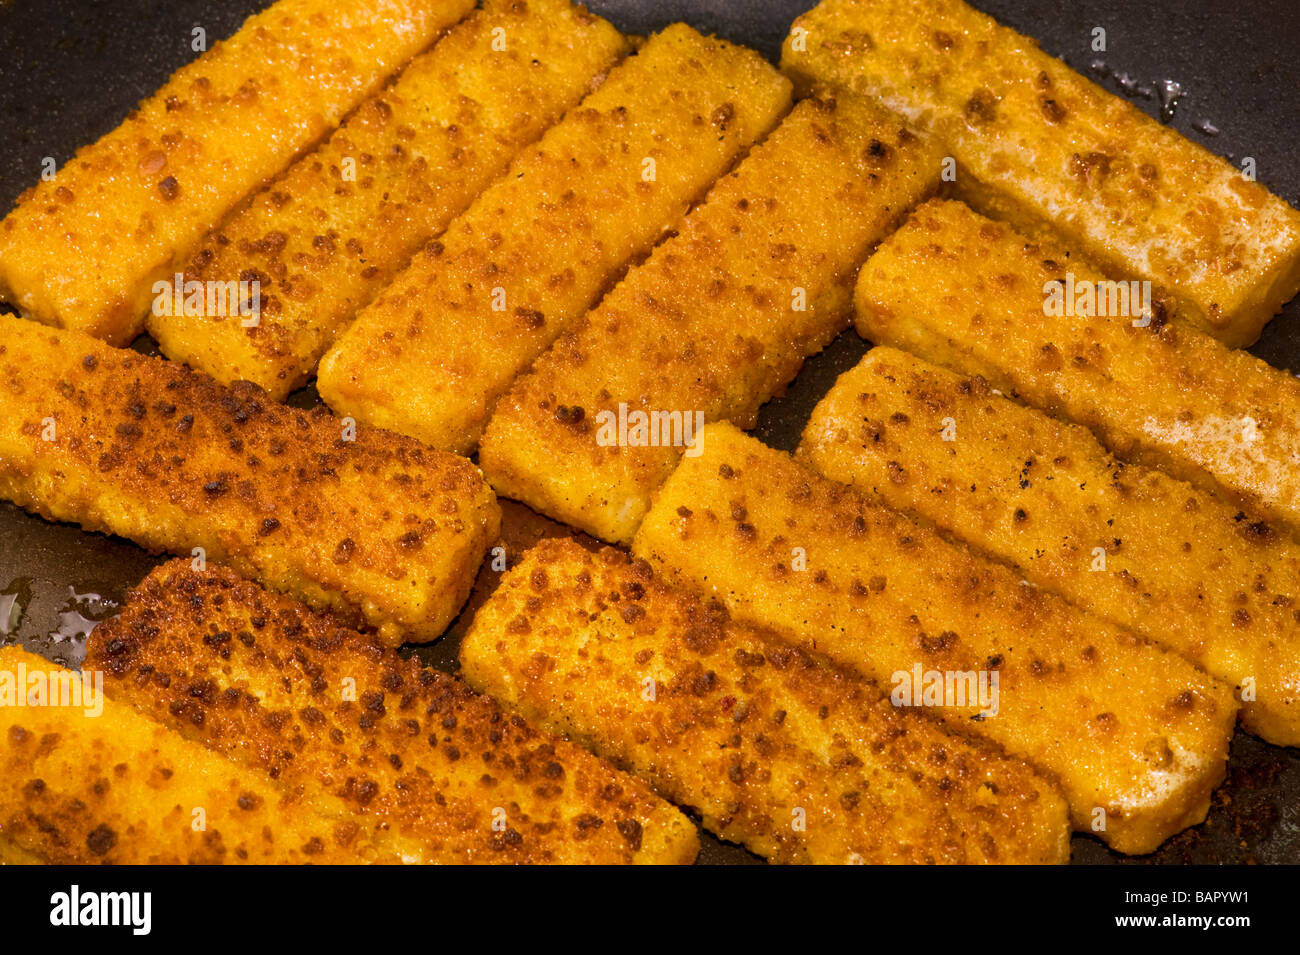 fried fish finger fish stick fry frying brown browning roast roasting roasted bake baking fat oil fryer fries seafood sea diet c Stock Photo